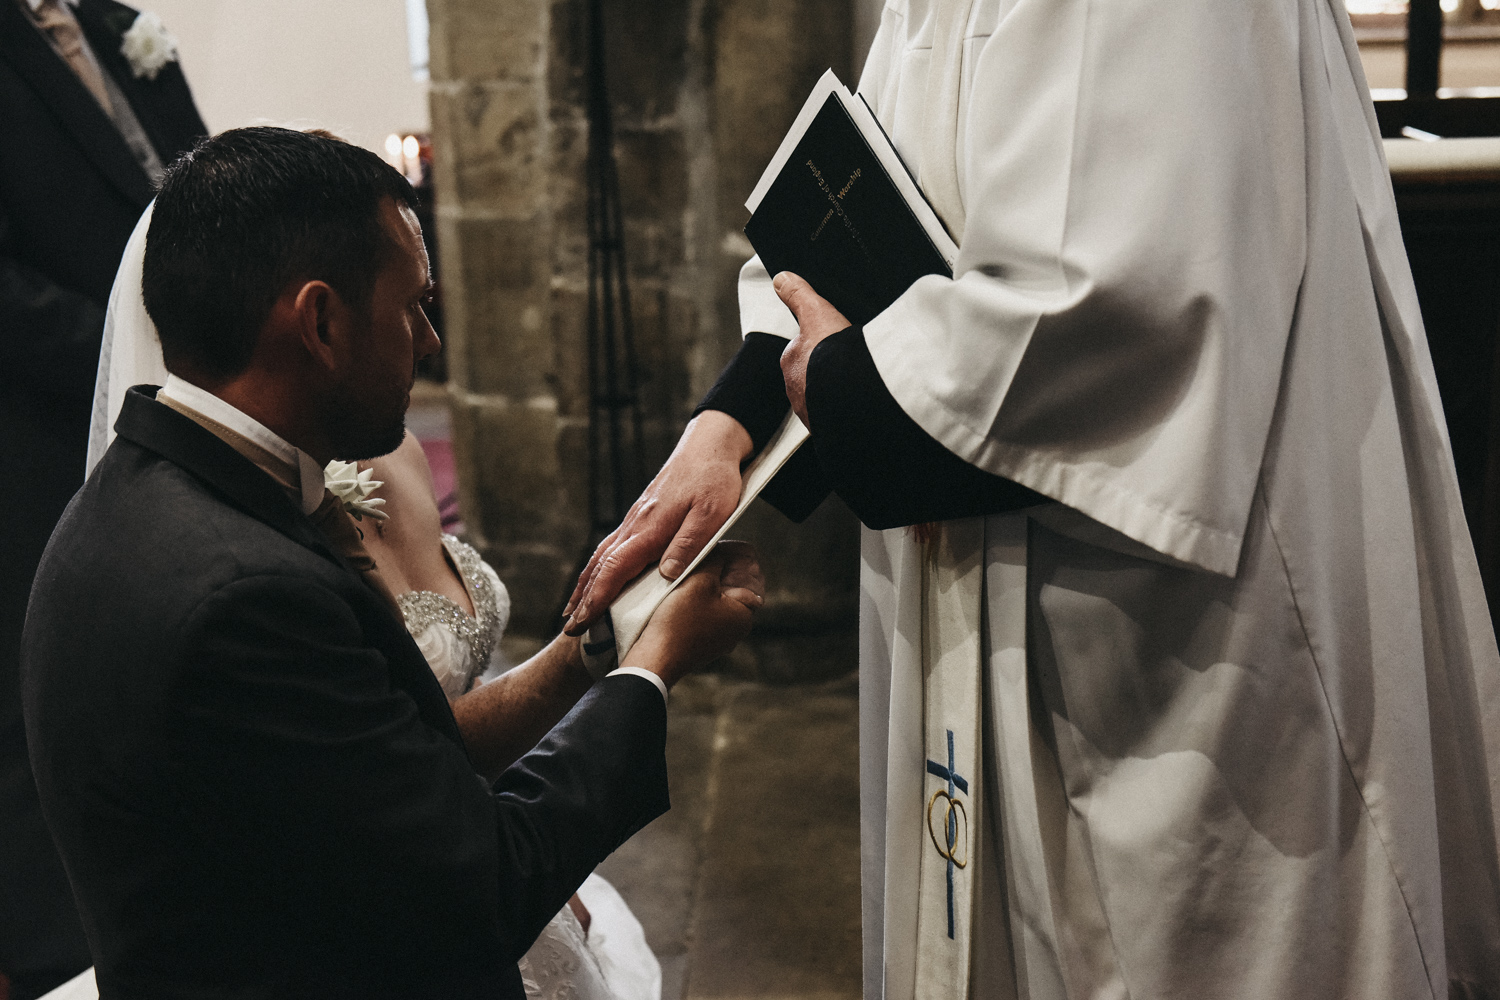 Vicar blessing the married couple